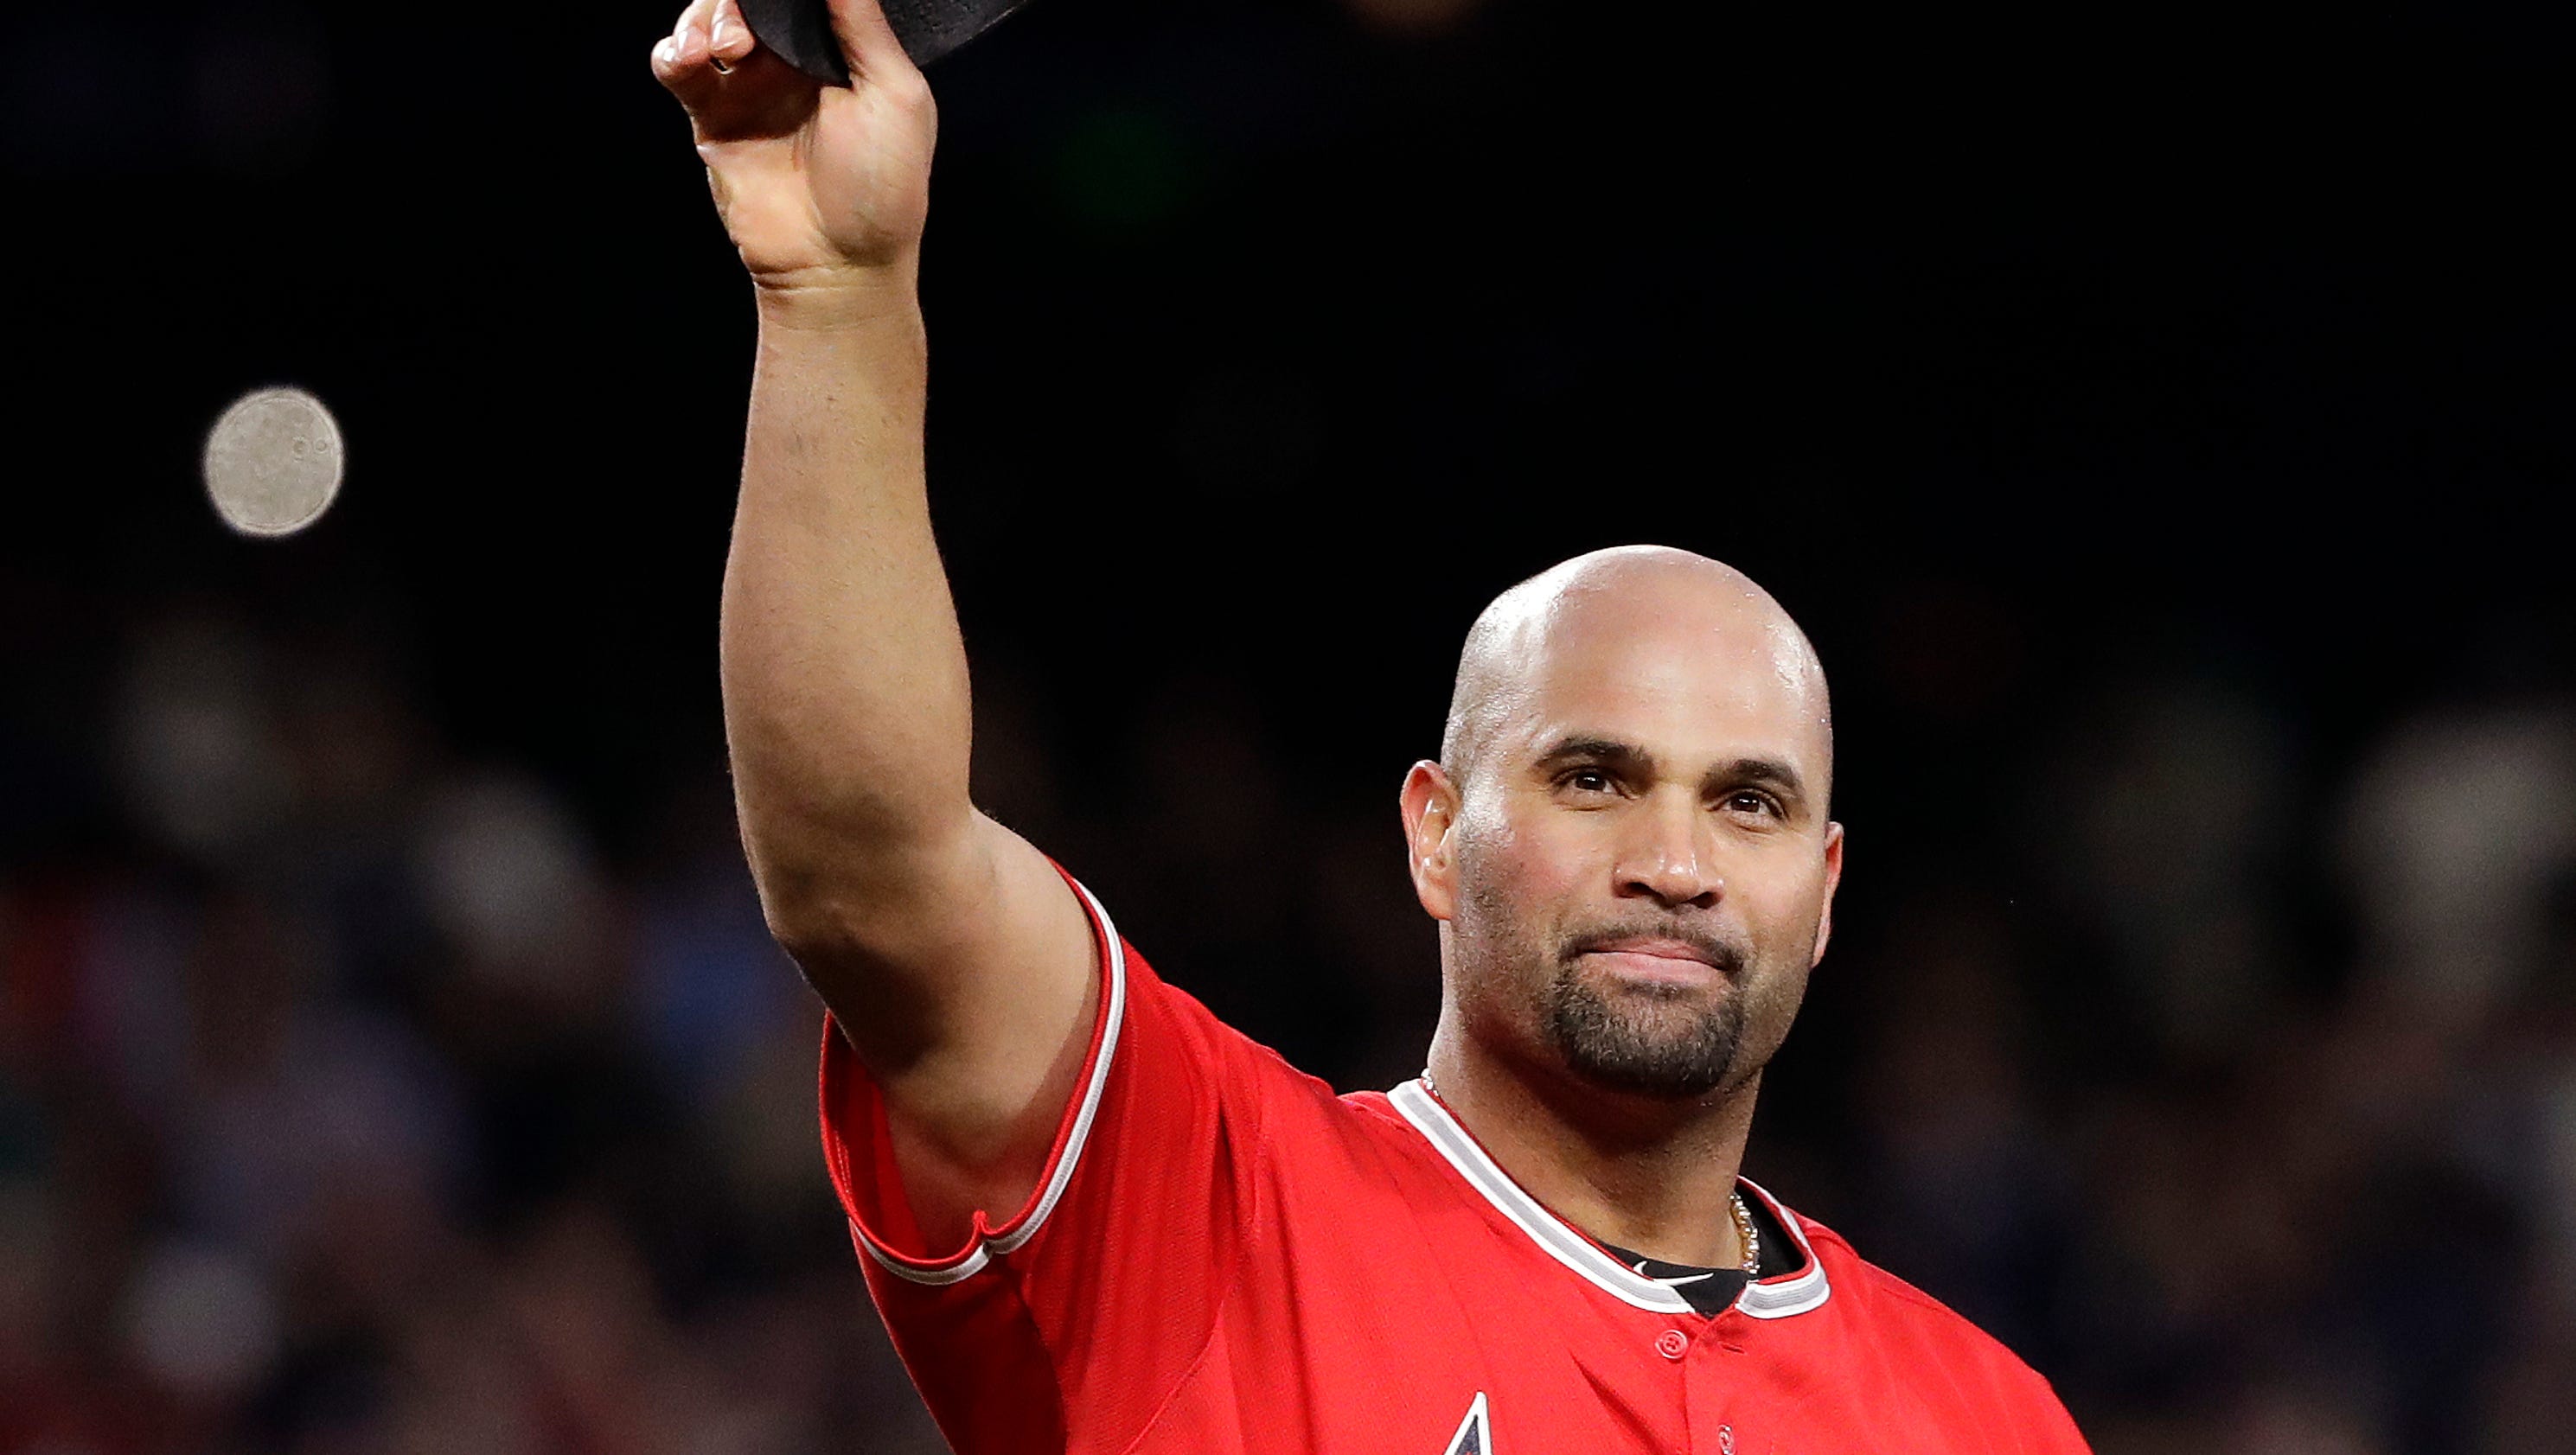 Albert Pujols earns 3,000th hit, joining A-Rod, Hank Aaron, Willie Mays in exclusive club